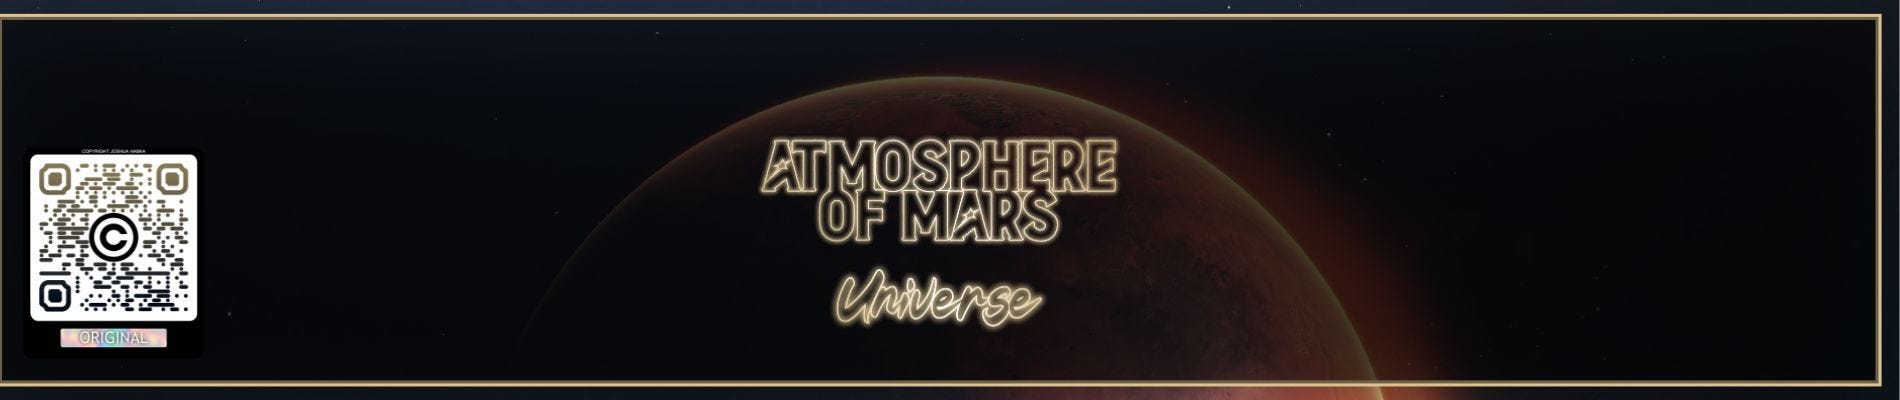 What Is The Atmosphere Like on Mars-